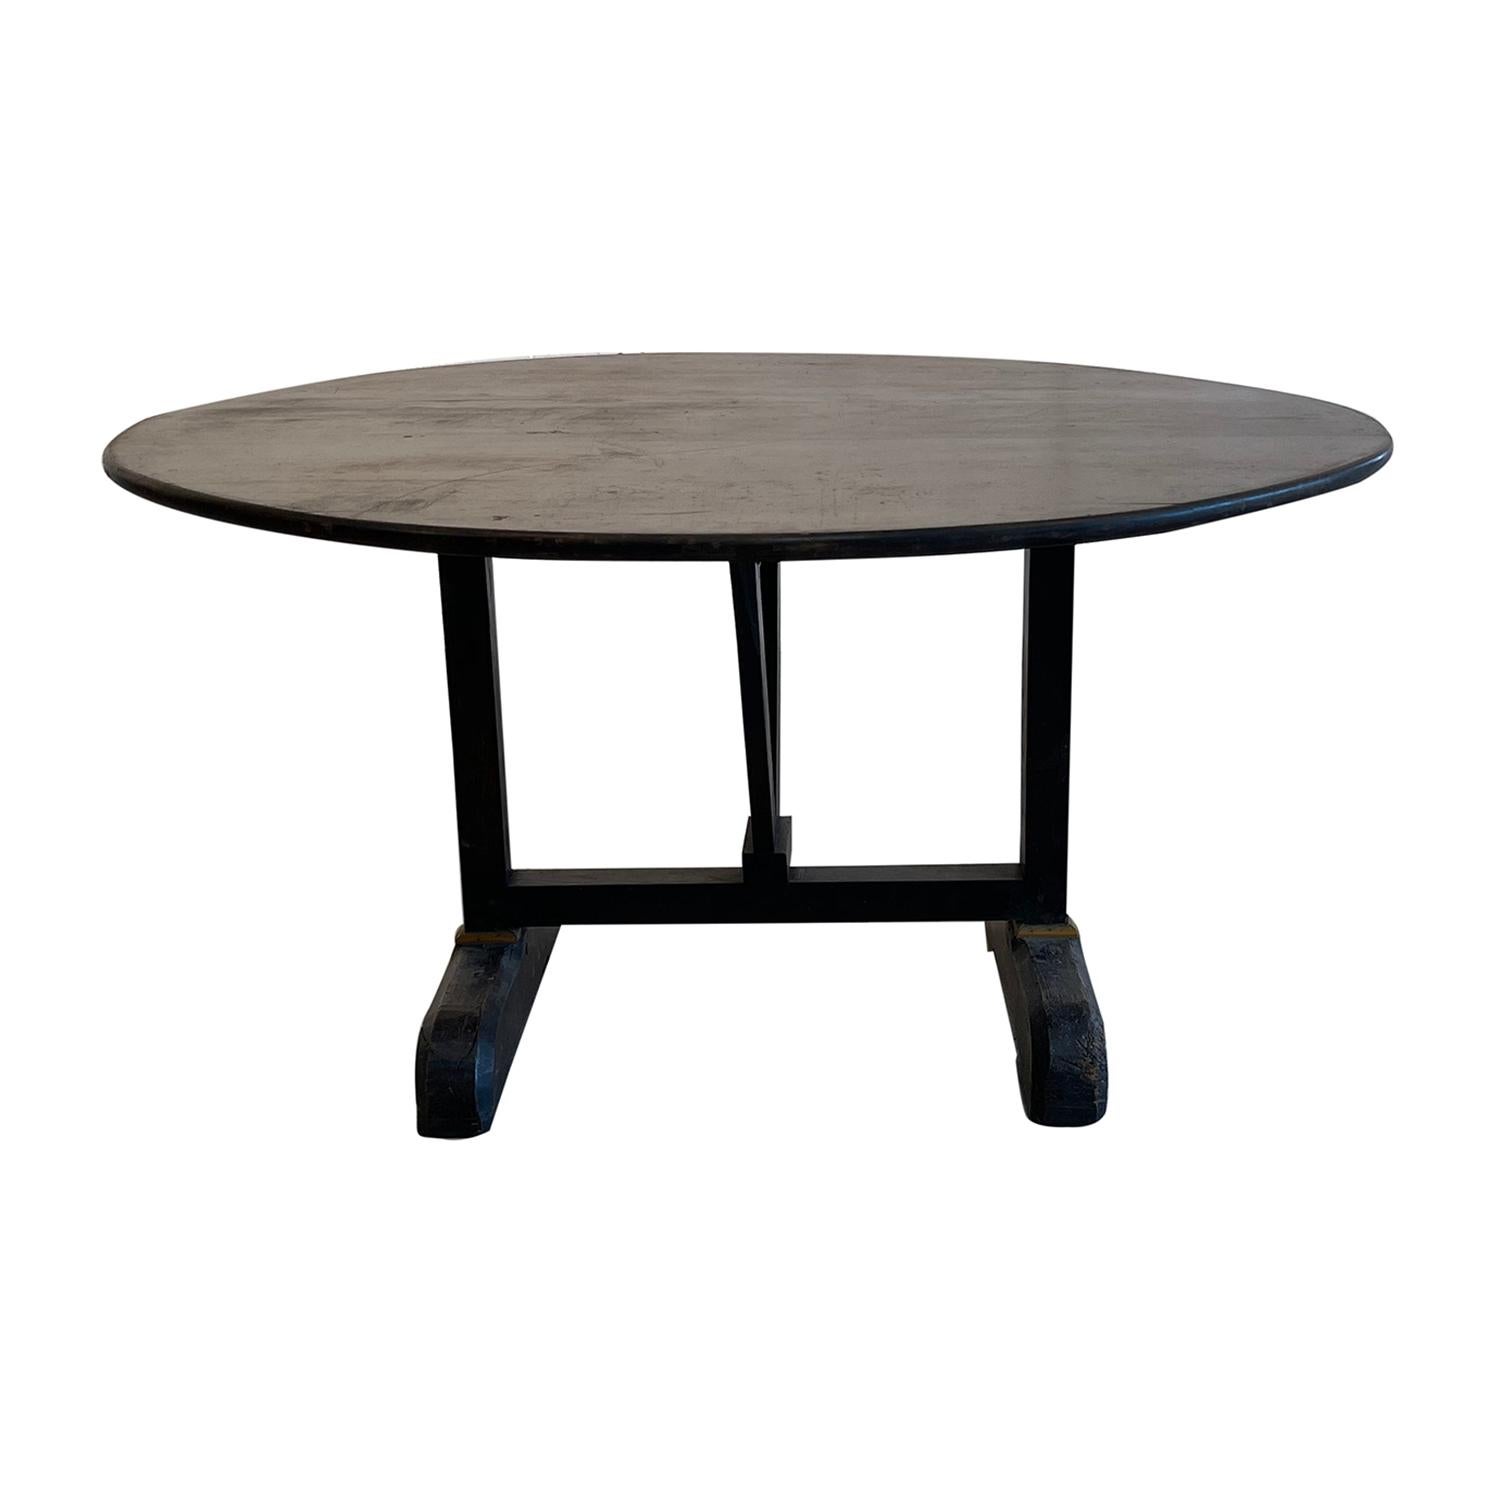 An antique, small oval French Provincial wine folding table made of hand crafted Walnut, in good condition. The Vigneron tables are used in France as occasional tables in wine cellars. Minor fading, scratches due to age. Wear consistent with age and